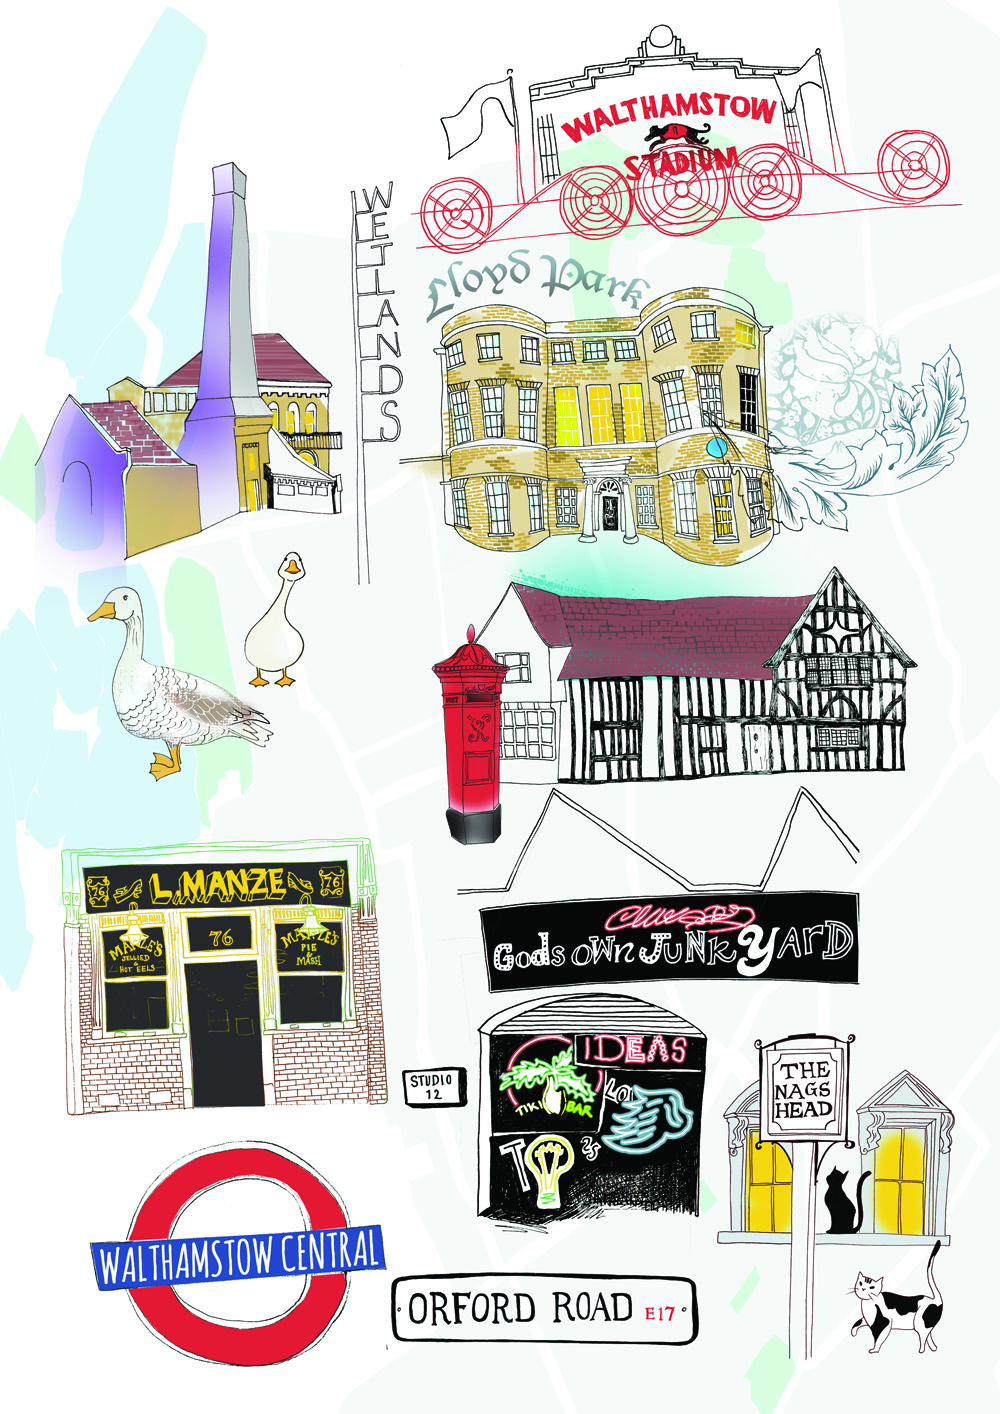  Walthamstow illustration used in area guide by Trading Places Estate Agency